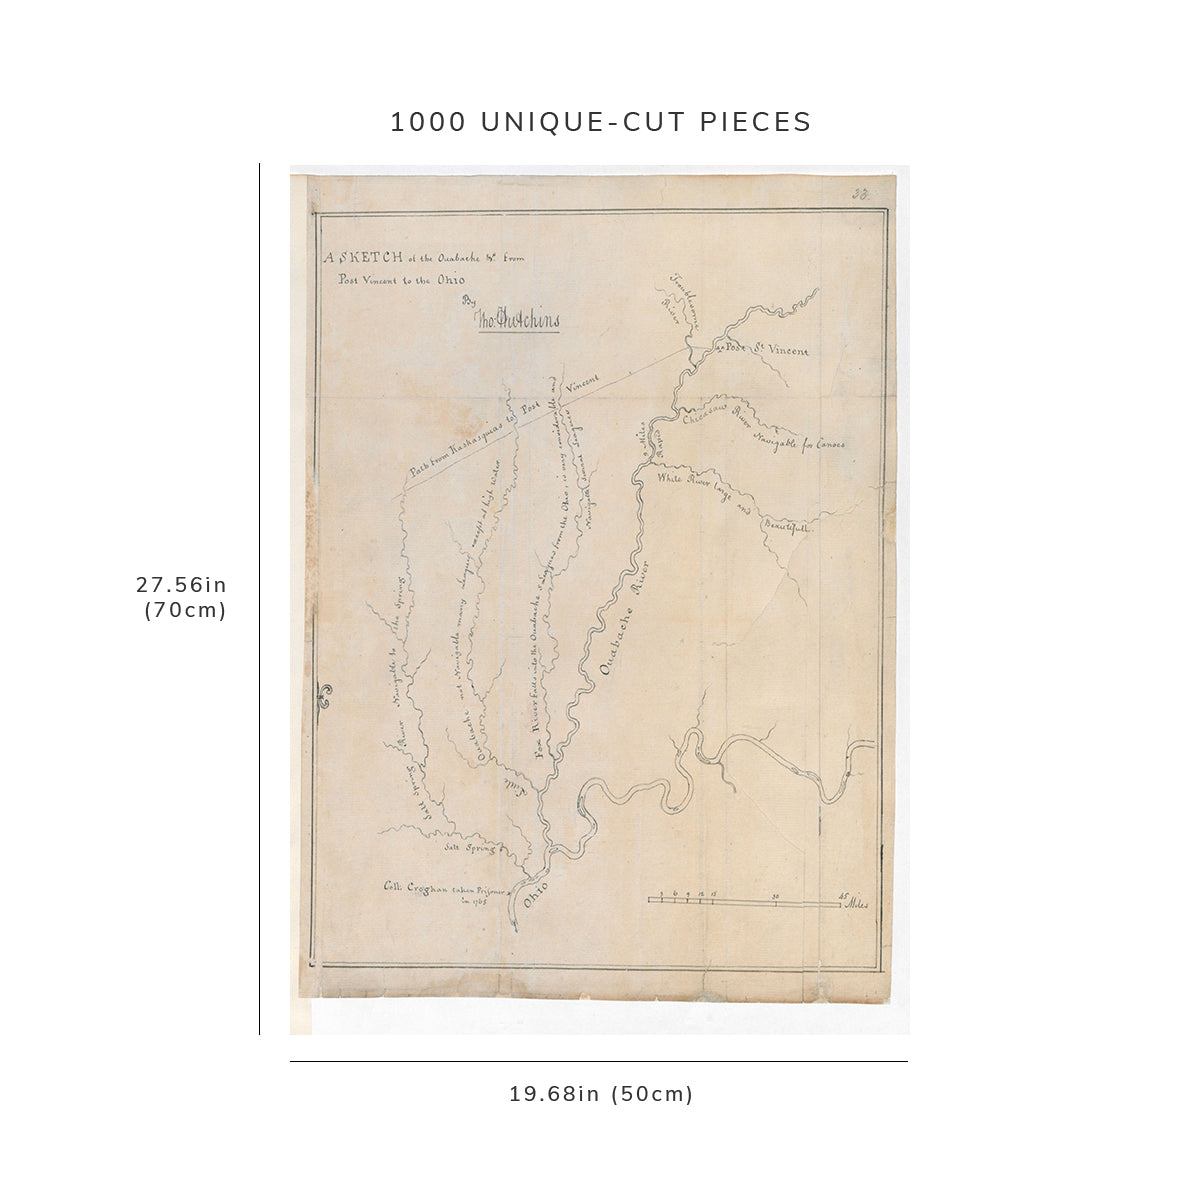 1000 Piece Jigsaw Puzzle: Map Wabash River A SKETCH of the Ouabache &c from Post Vincent